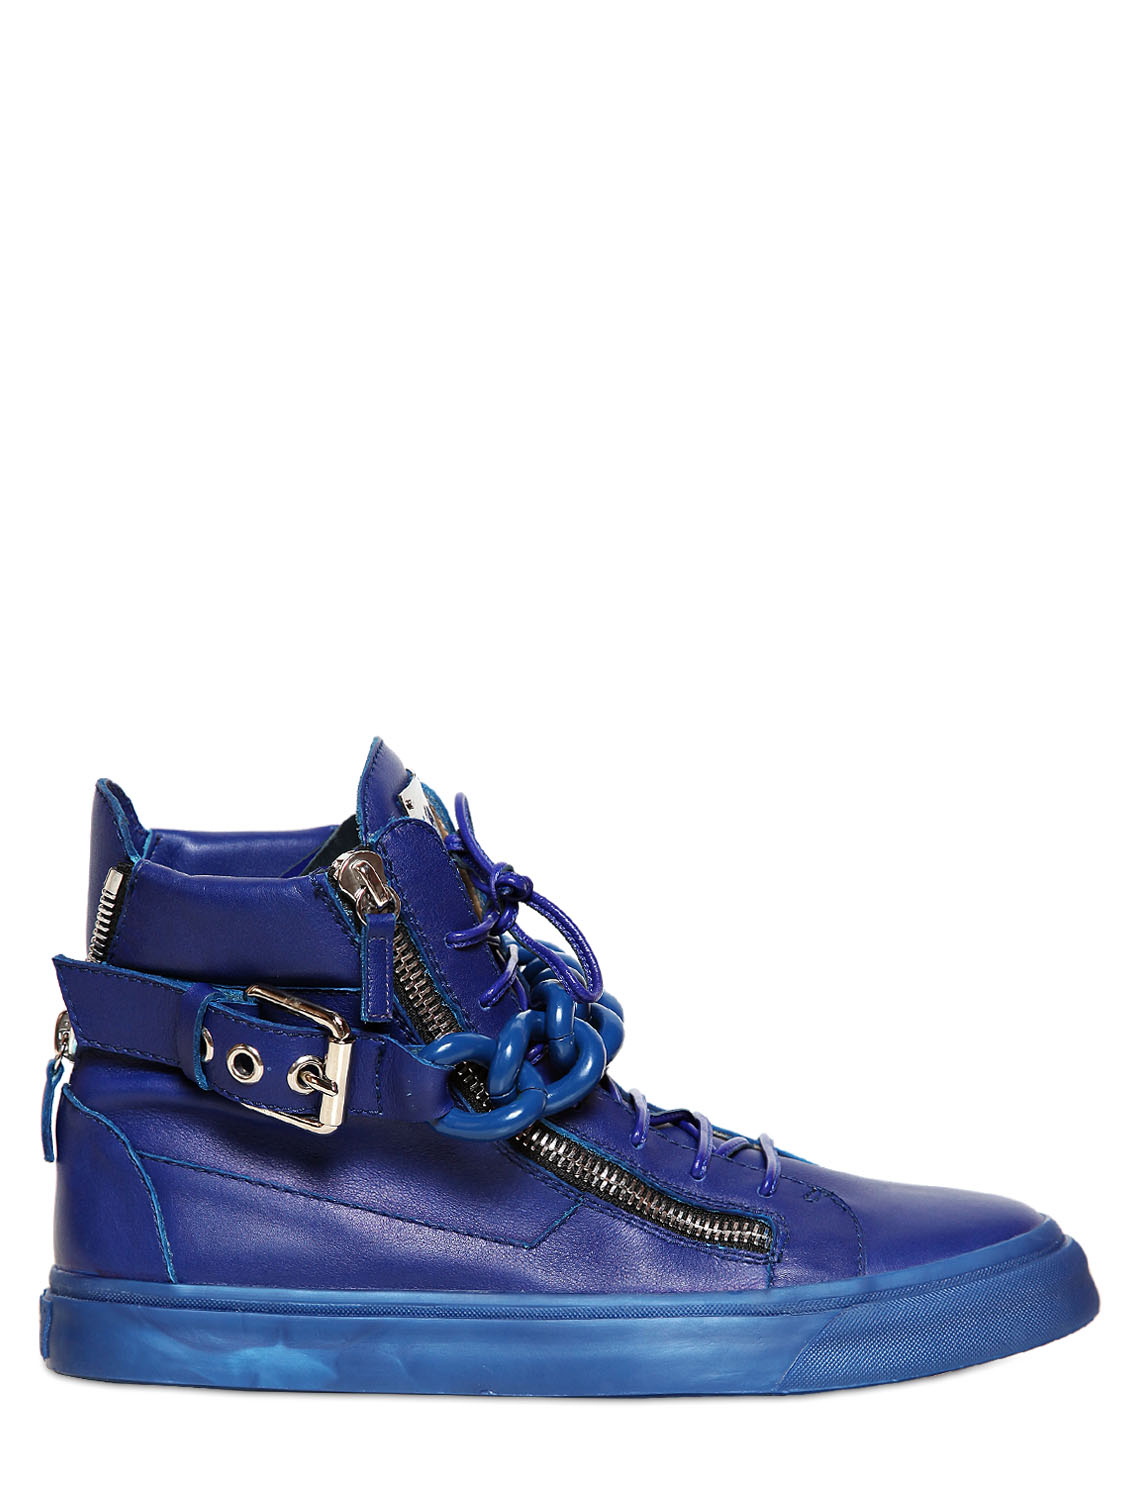 Lyst - Giuseppe Zanotti Metal Chain Leather High Top Sneakers in Blue ...